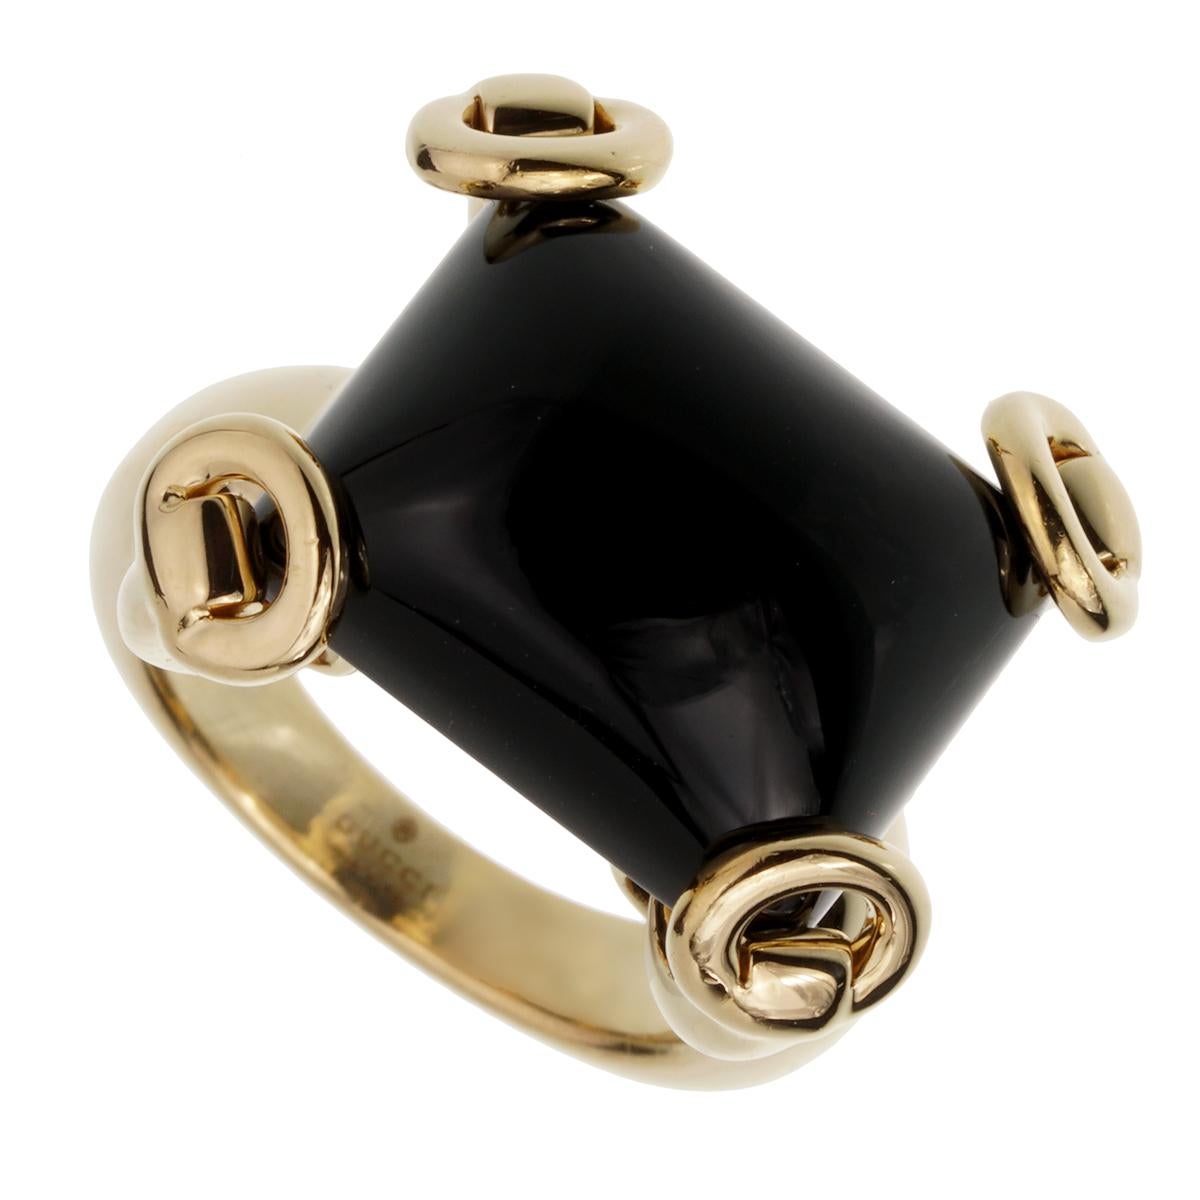 An iconic Gucci cocktail ring showcasing a cabochon Onyx set in 4 stirrup shaped motifs in shimmering 18k yellow gold. The ring measures measures a size 5 3/4 and can be resized.